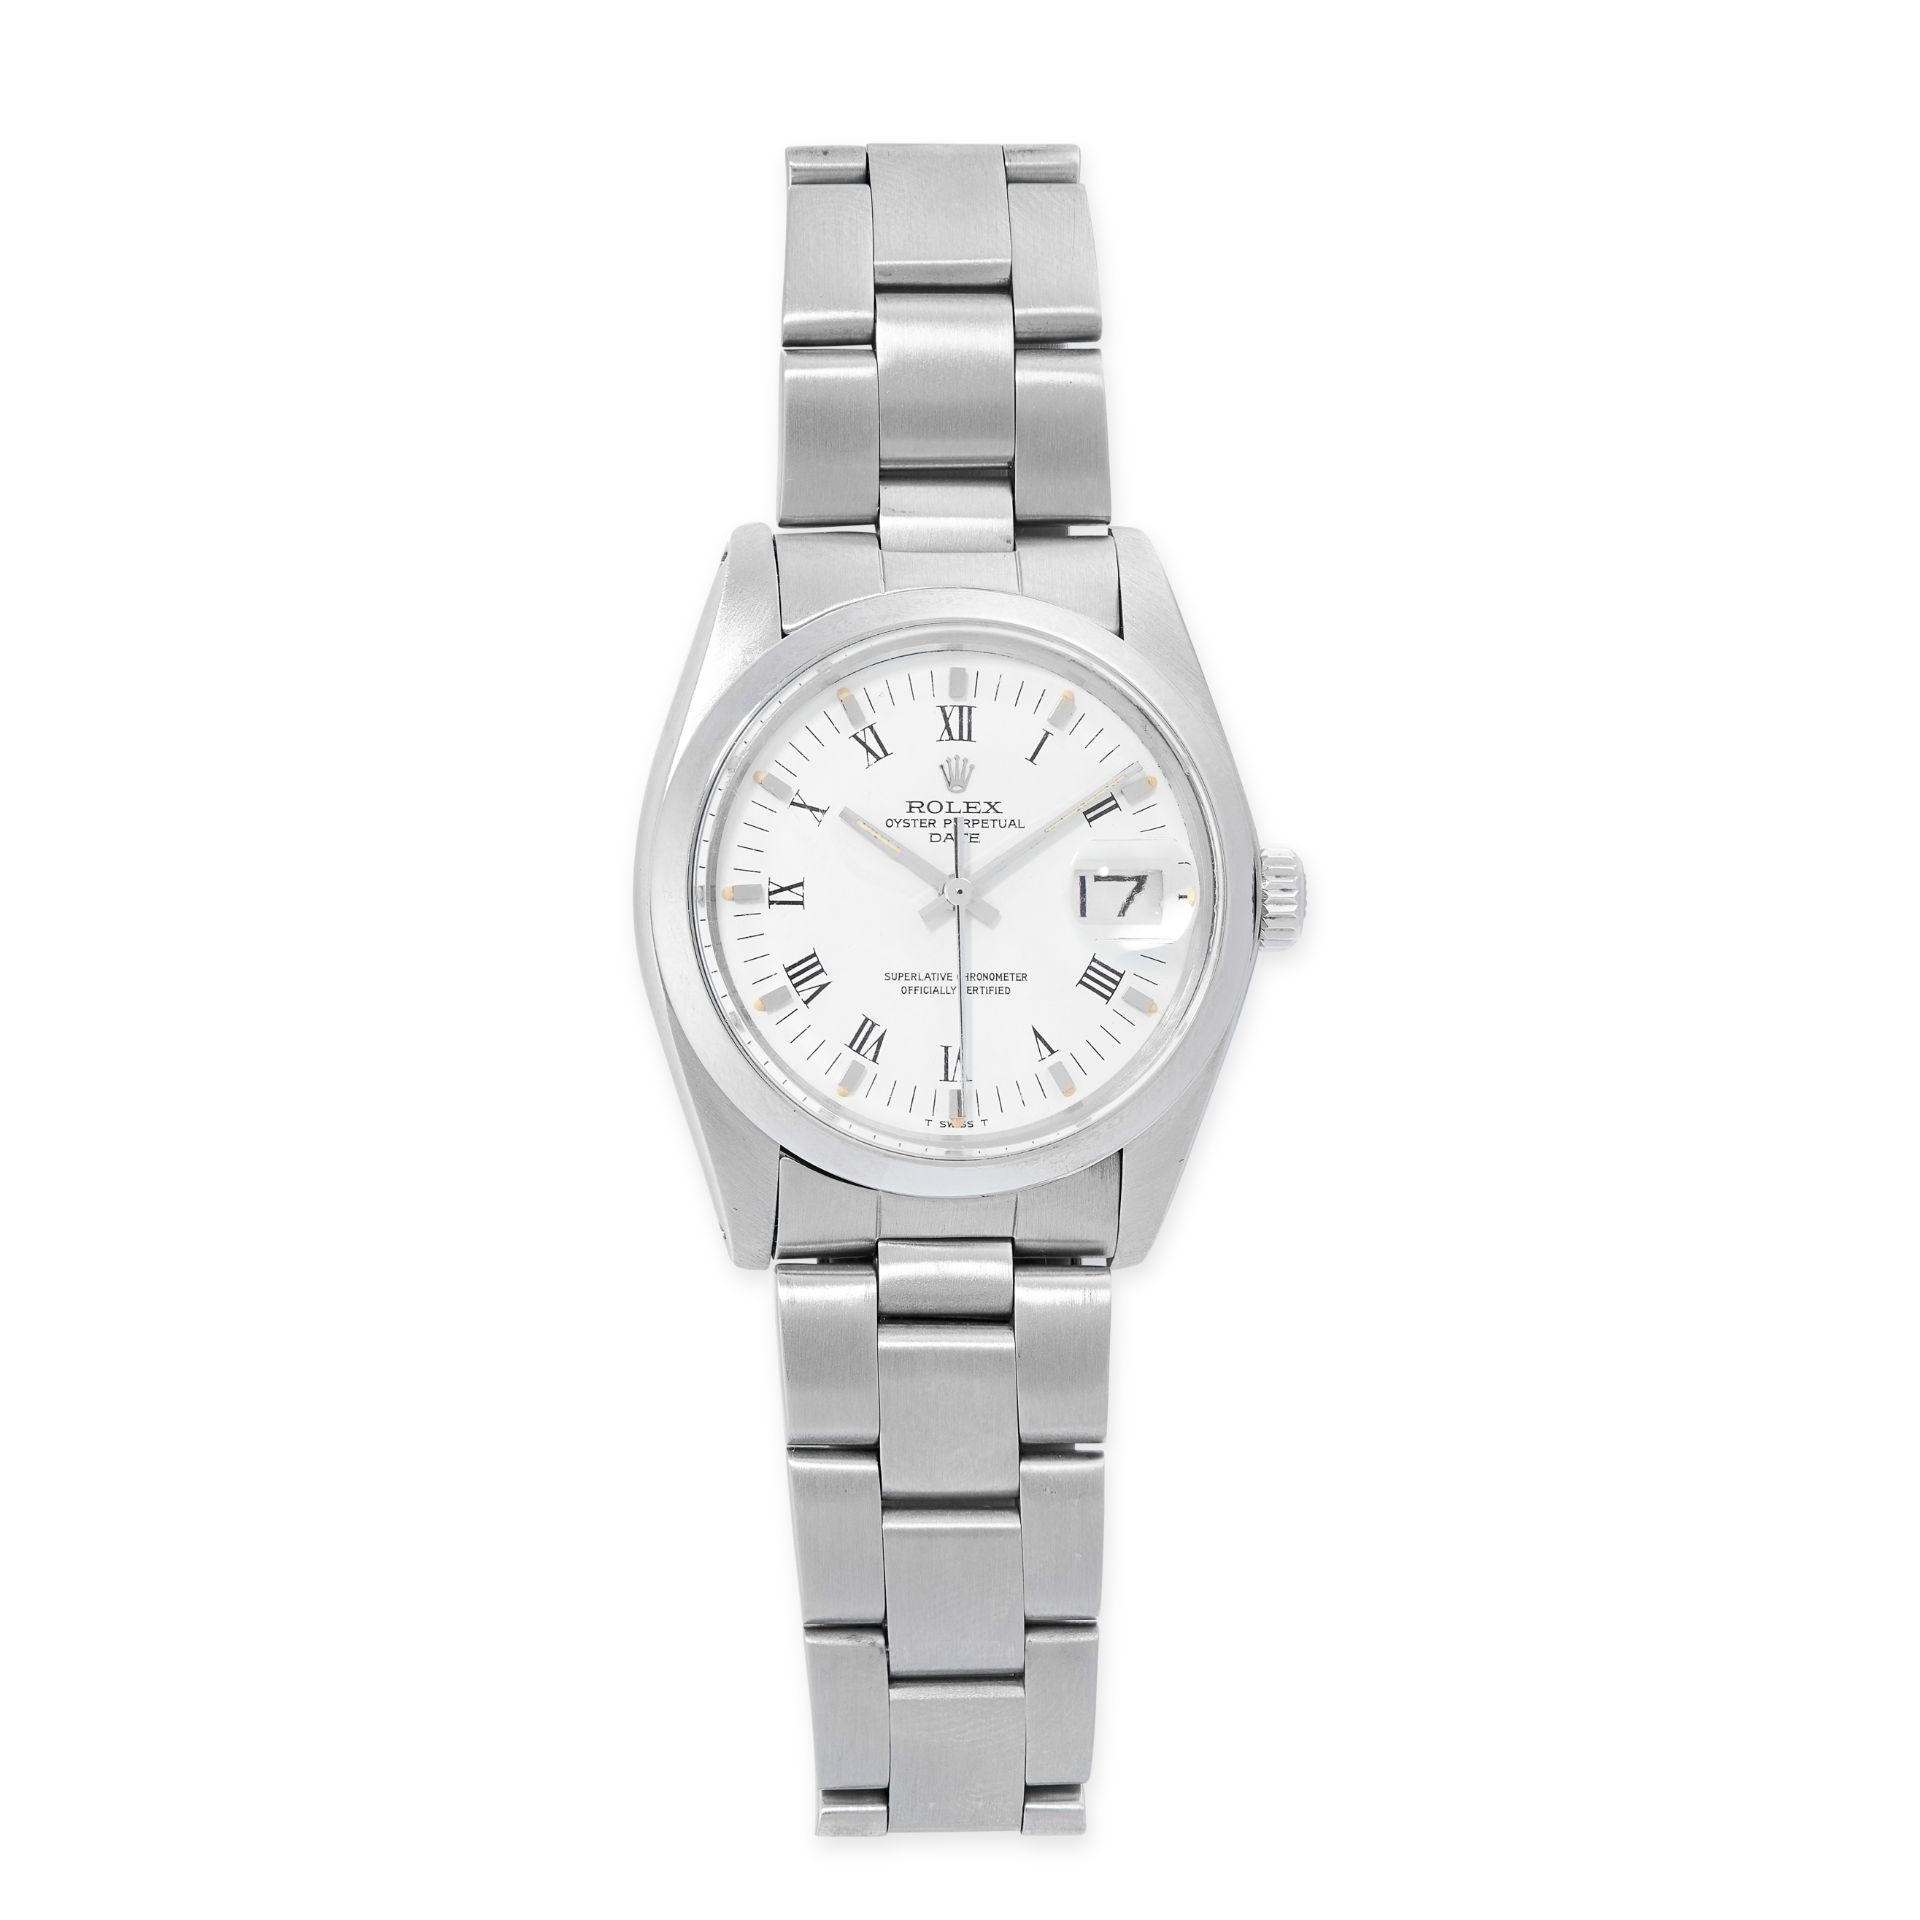 AN OYSTER PERPETUAL DATE WRIST WATCH, ROLEX in stainless steel, automatic movement, 34mm case, white